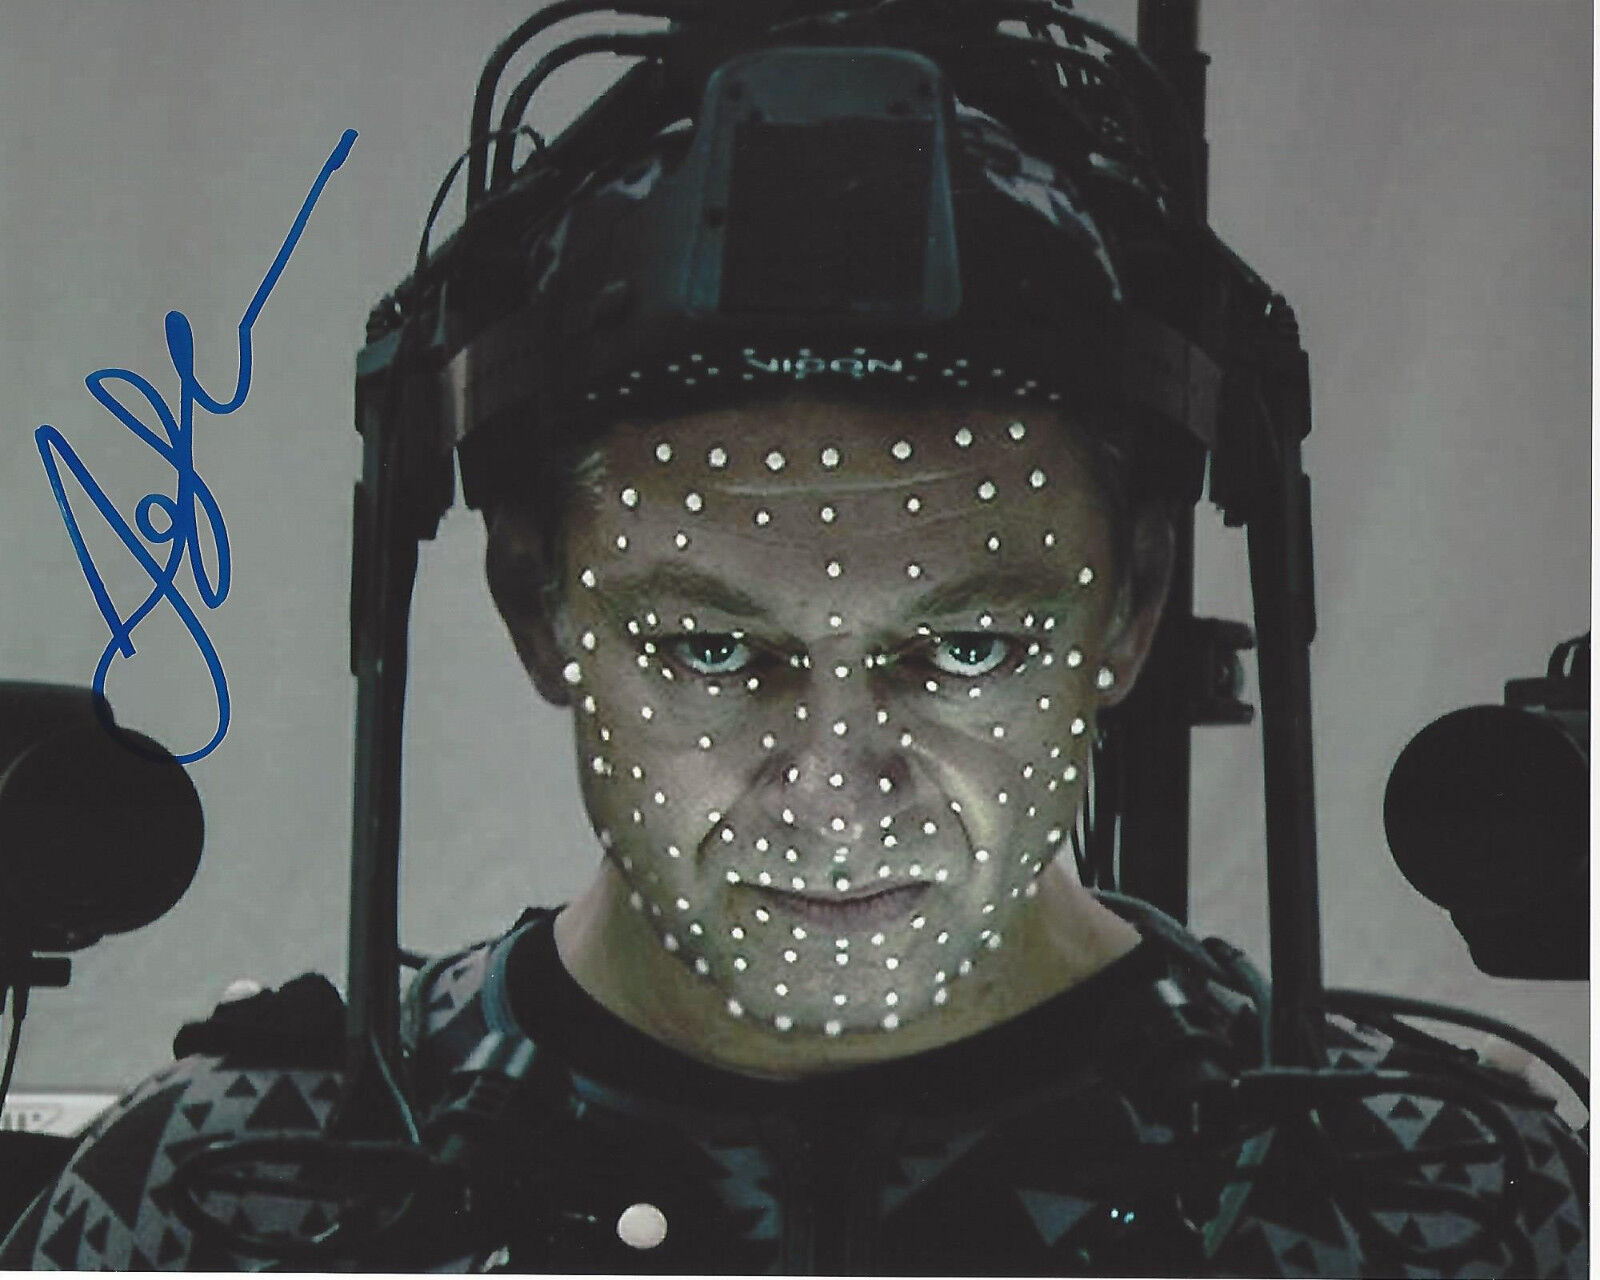 ANDY SERKIS MOTION CAPTURE ACTOR SIGNED AUTHENTIC 8X10 Photo Poster painting B w/COA PROOF